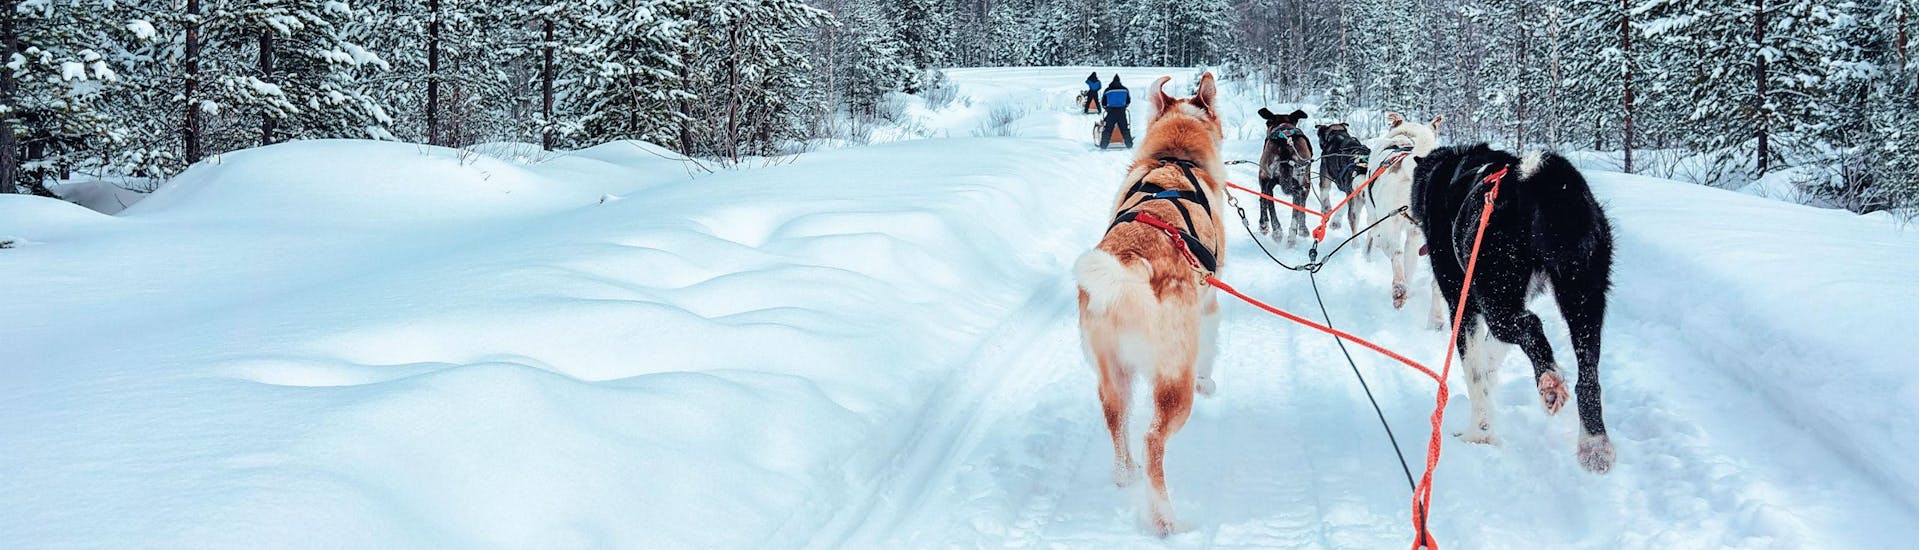 A stunning view of a snow-covered landscape while dog sledding near Trondheim in Kopperå.